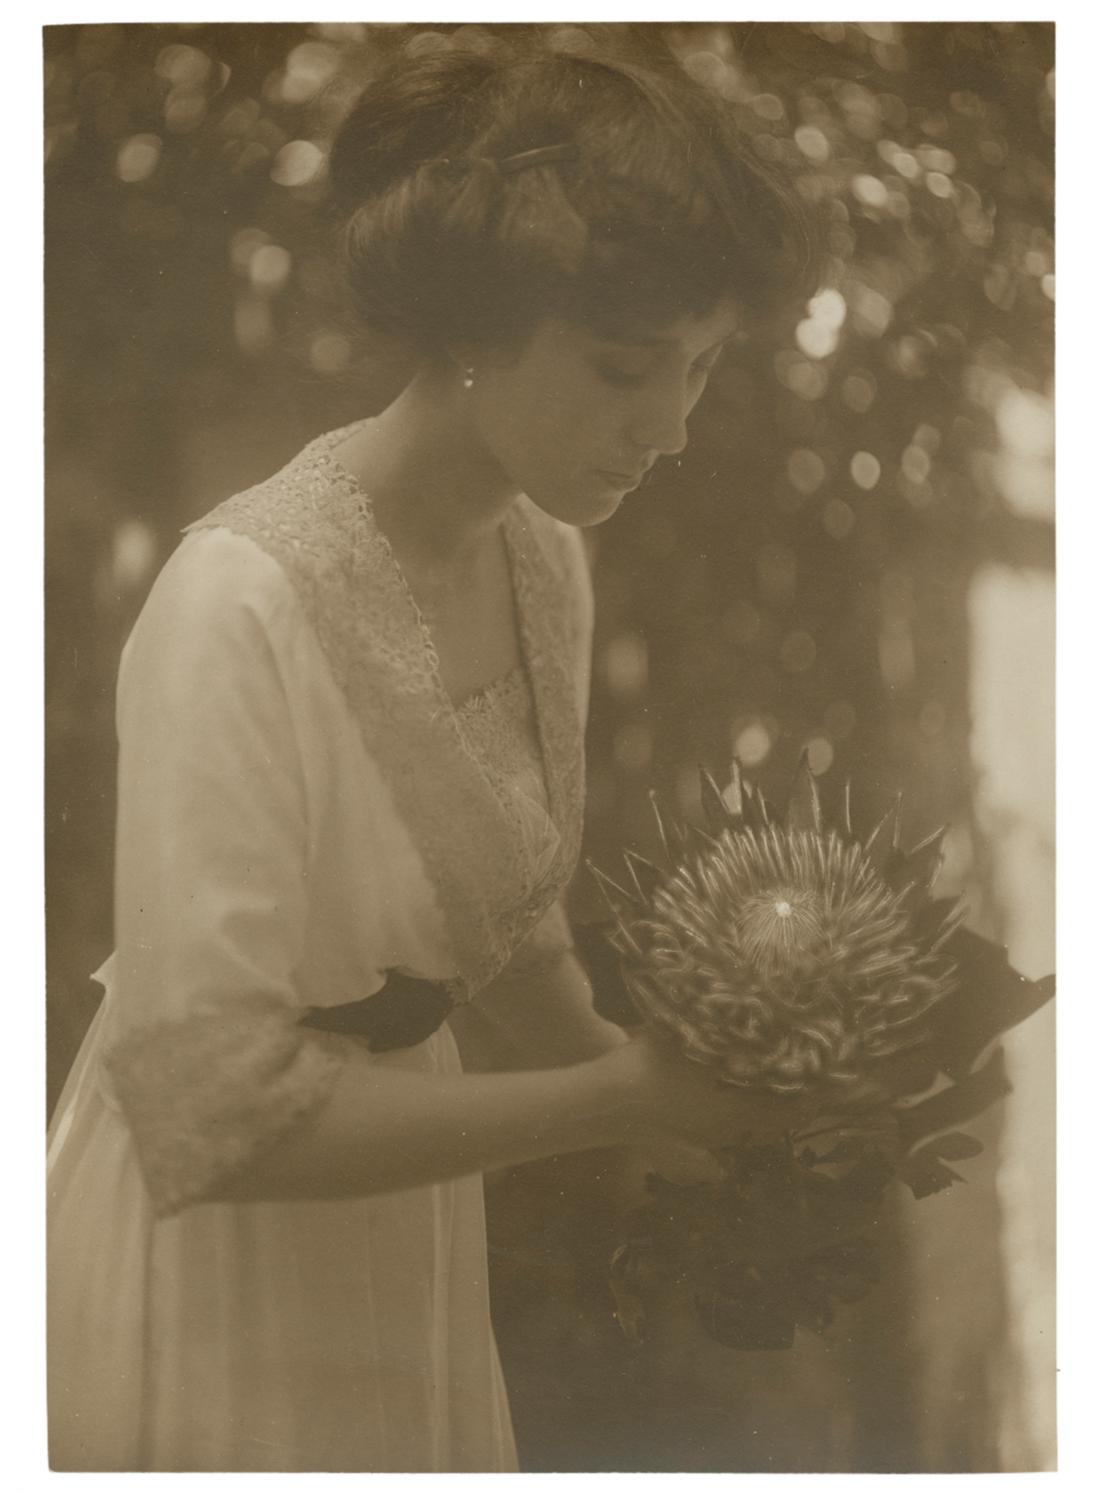 Woman in white dress holding a large flower. Black and white photograph by Minna Keene.